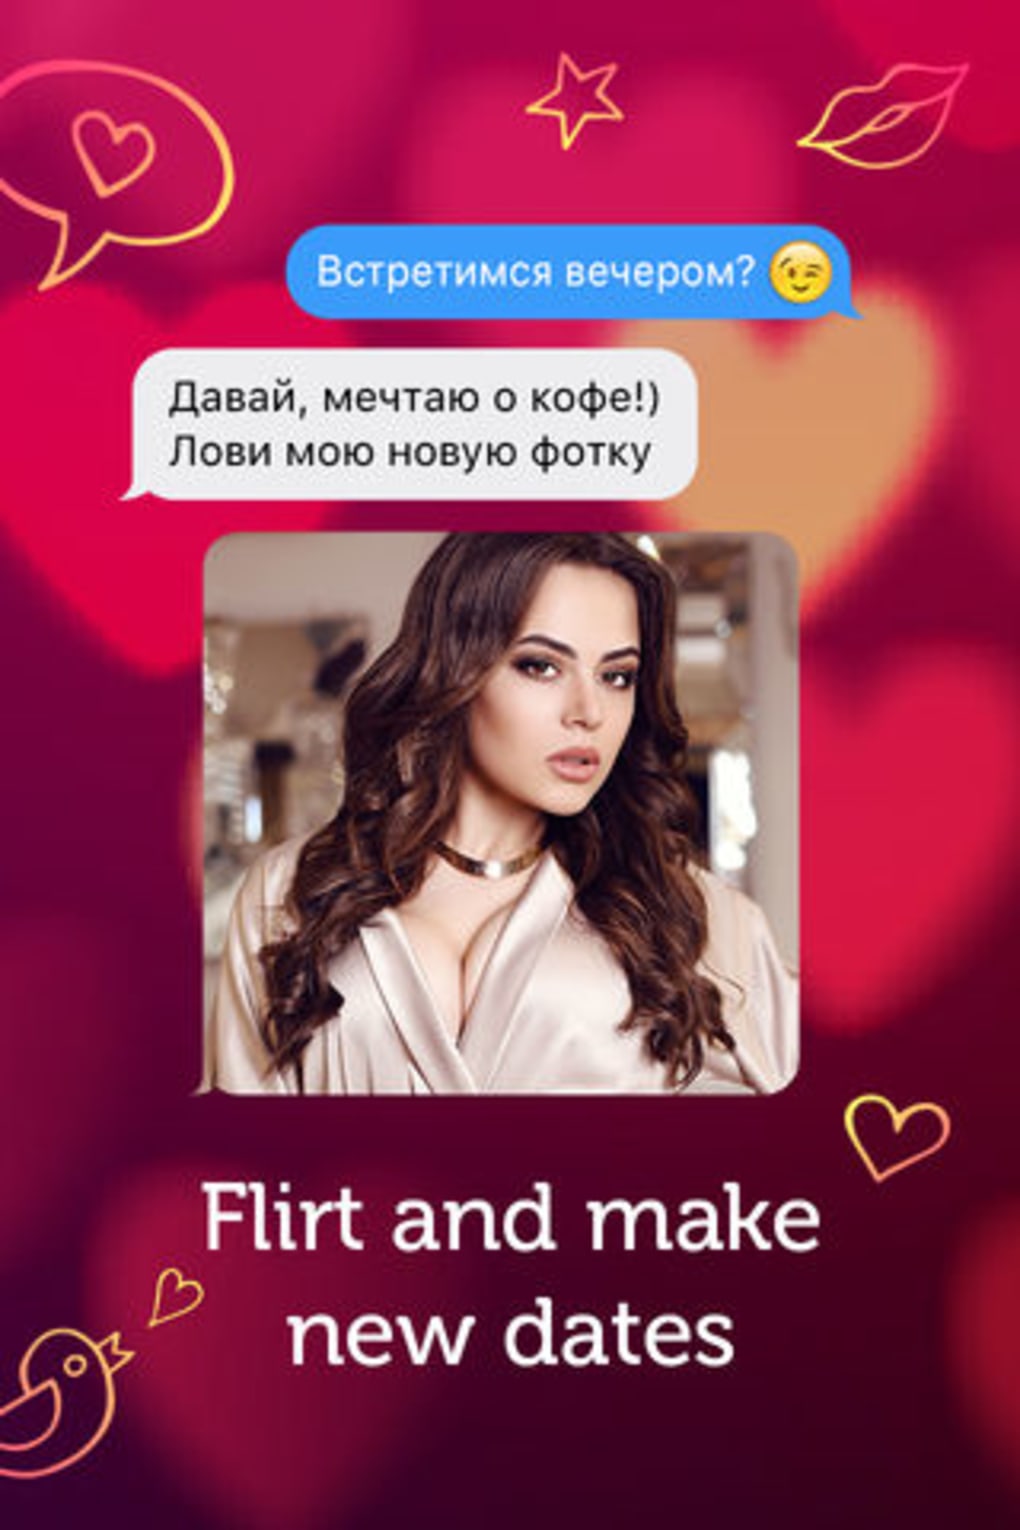 Which are the best dating apps or sites to date Russian girls?